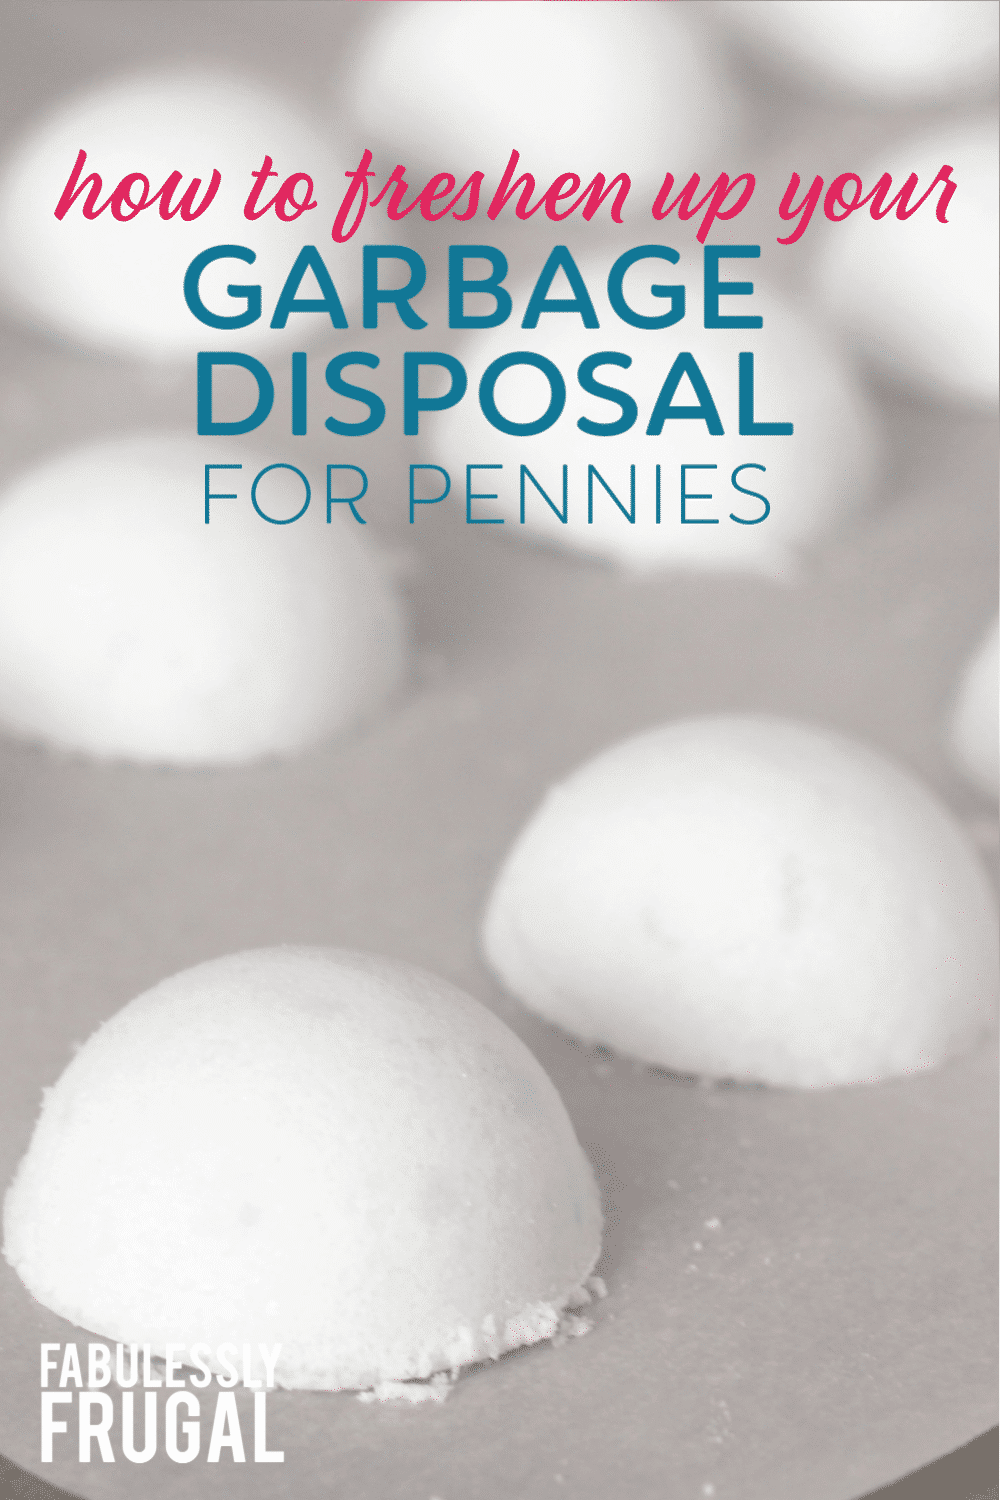 How to clean garbage disposal for pennies